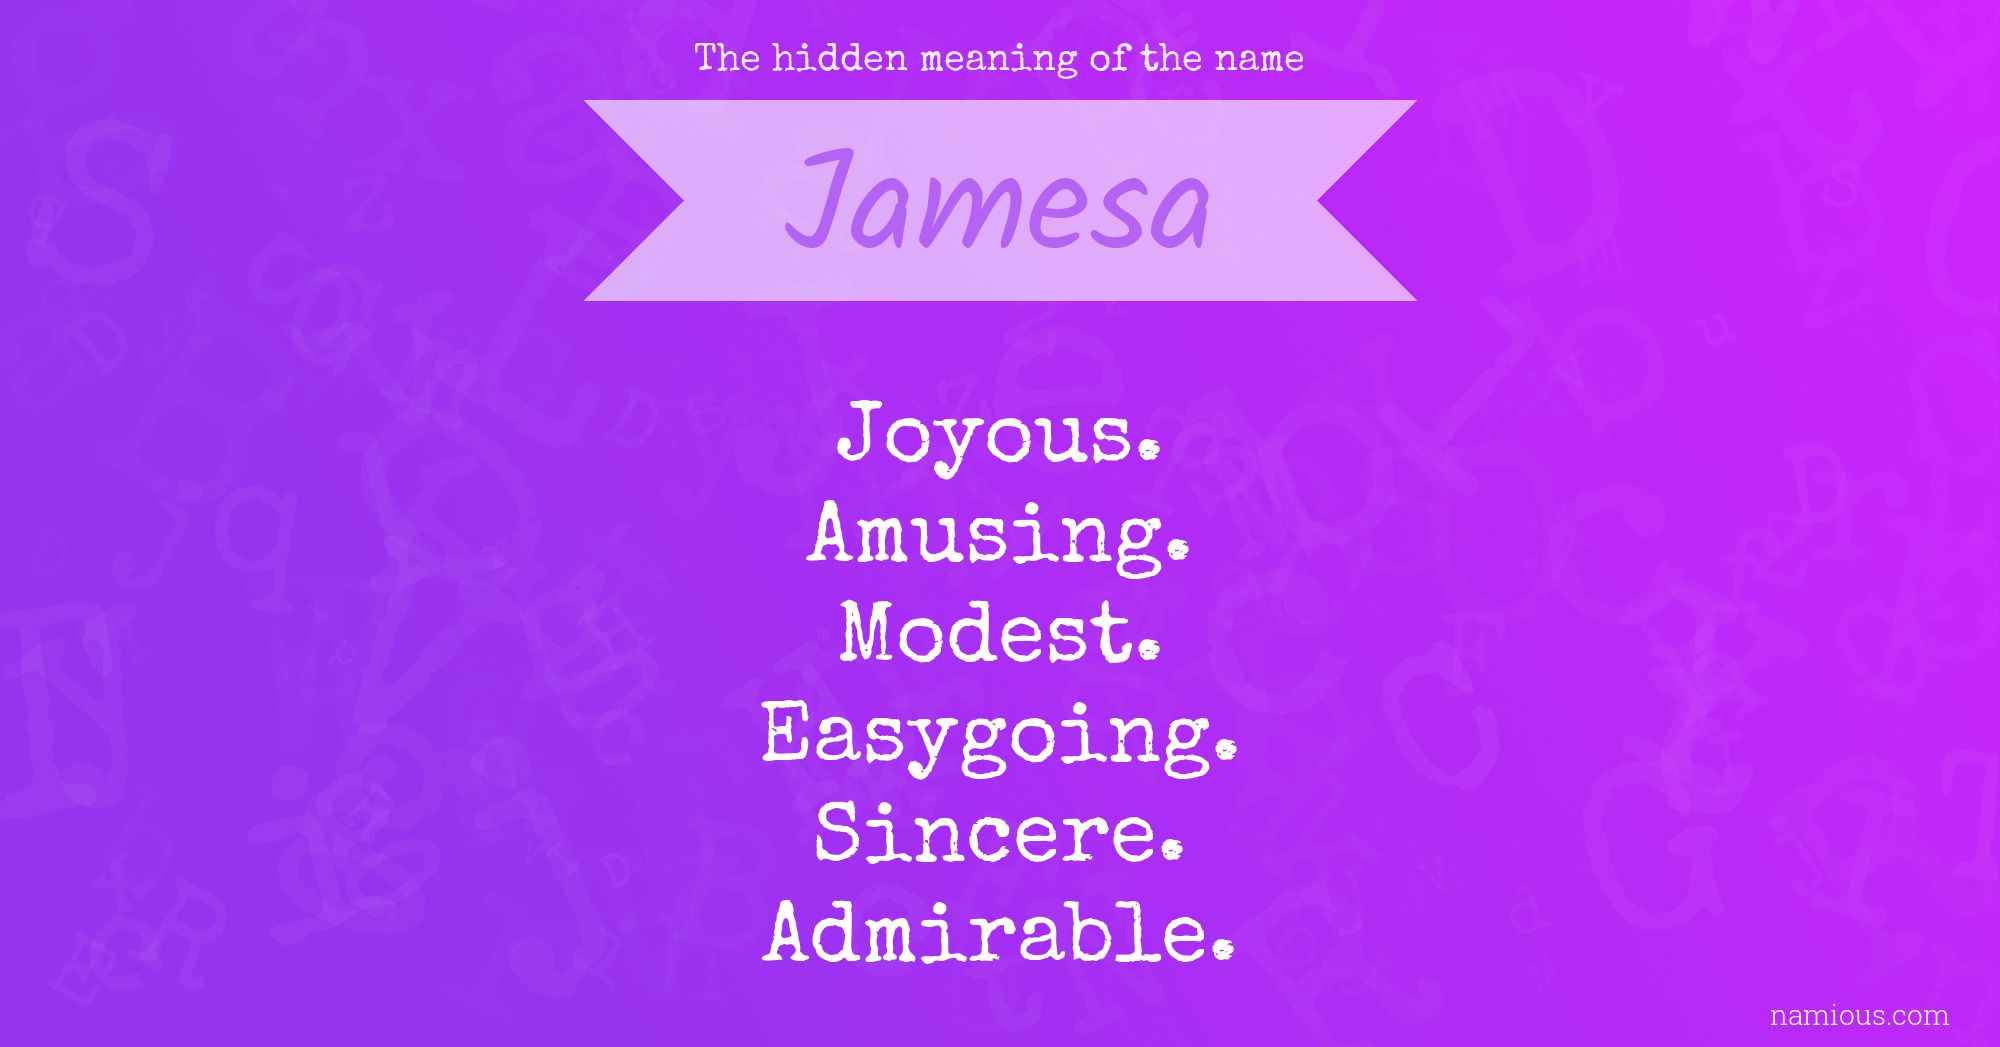 The hidden meaning of the name Jamesa